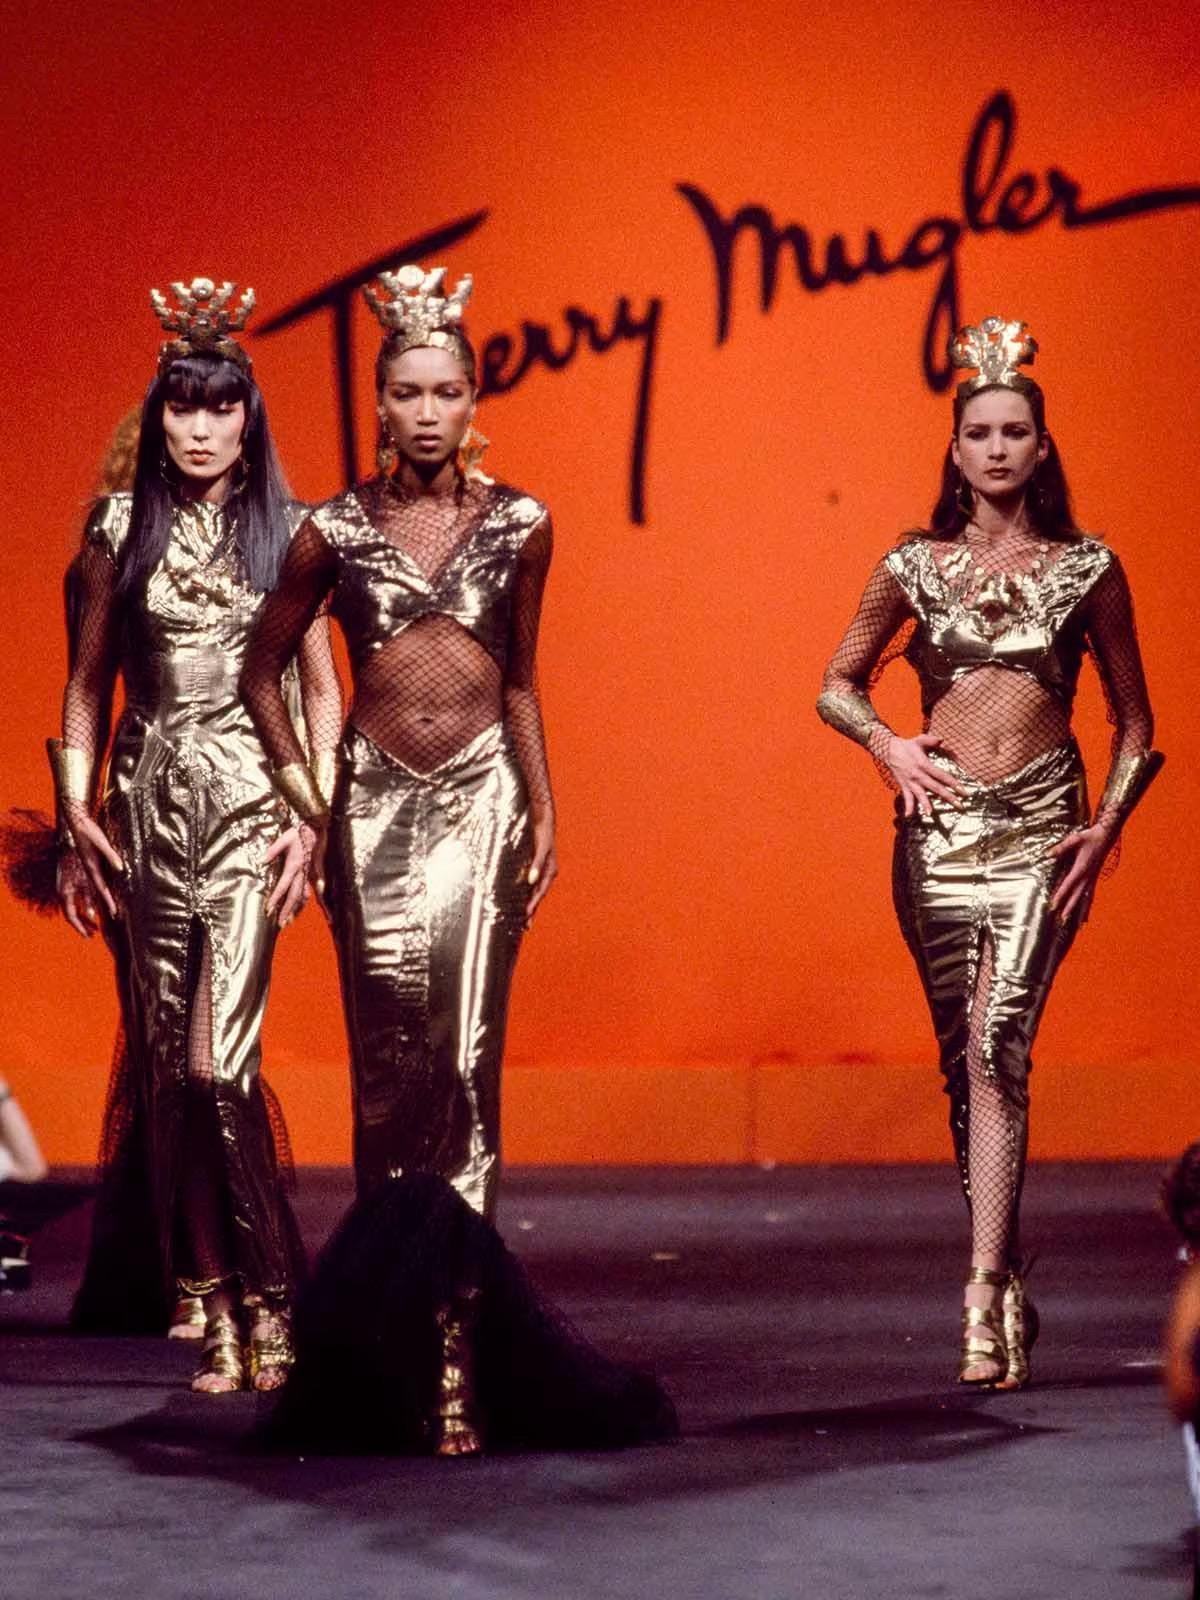 An iconic and highly coveted Thierry Mugler couture metallic gold lamé and fishnet hourglass gown dating back to his documented 1985 spring/summer collection. Garments from this show are next to impossible to find. This legendary French fashion